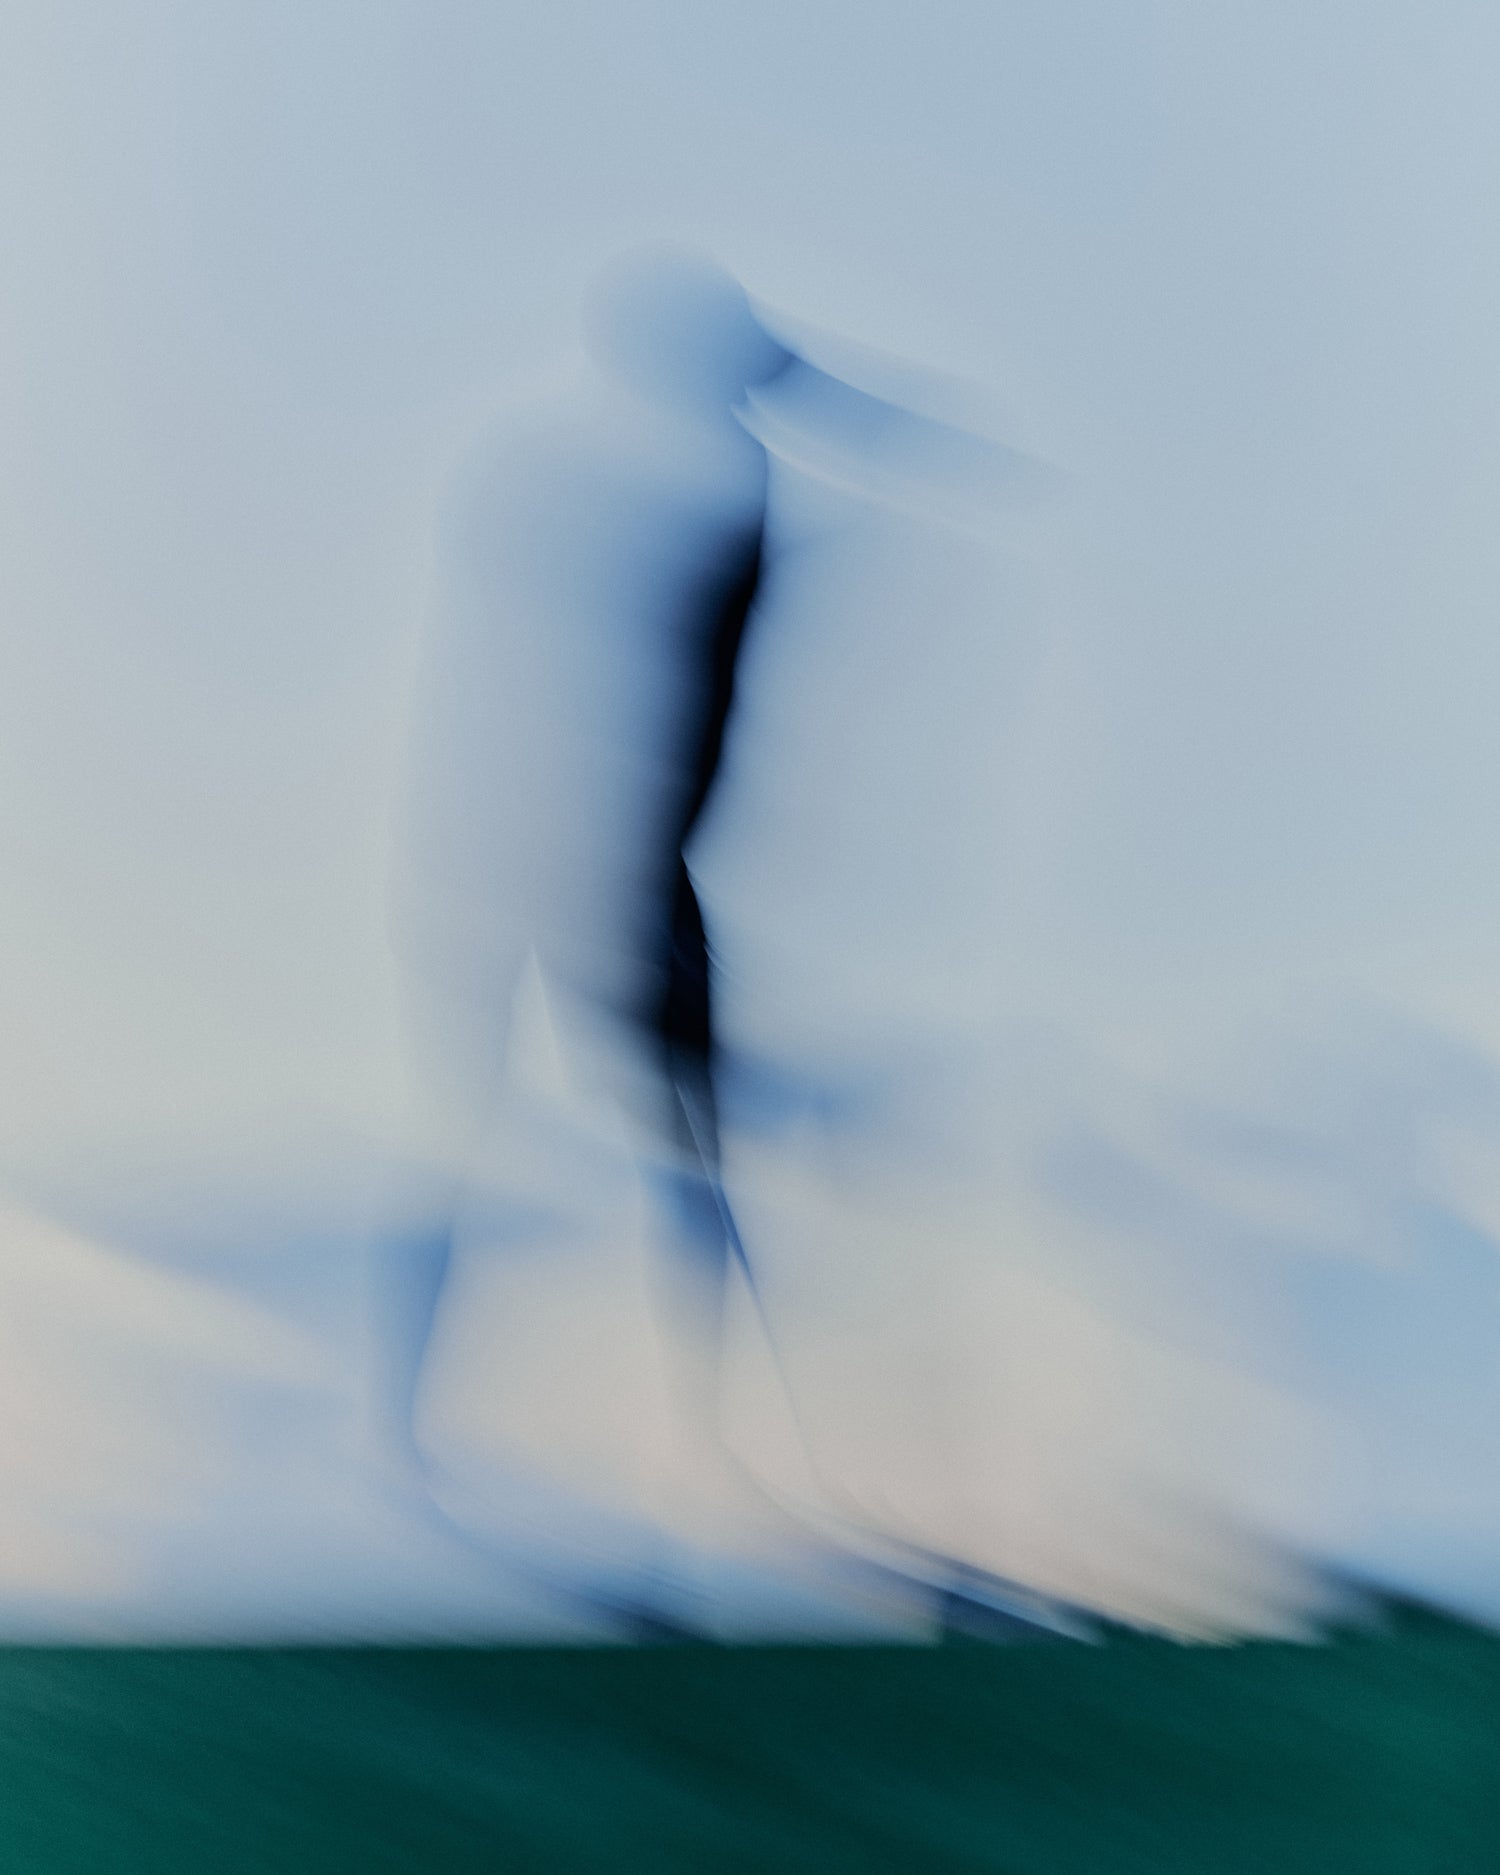 Abstract blurry image of a golfer preparing to swing at the Grove XXIII Golf Club